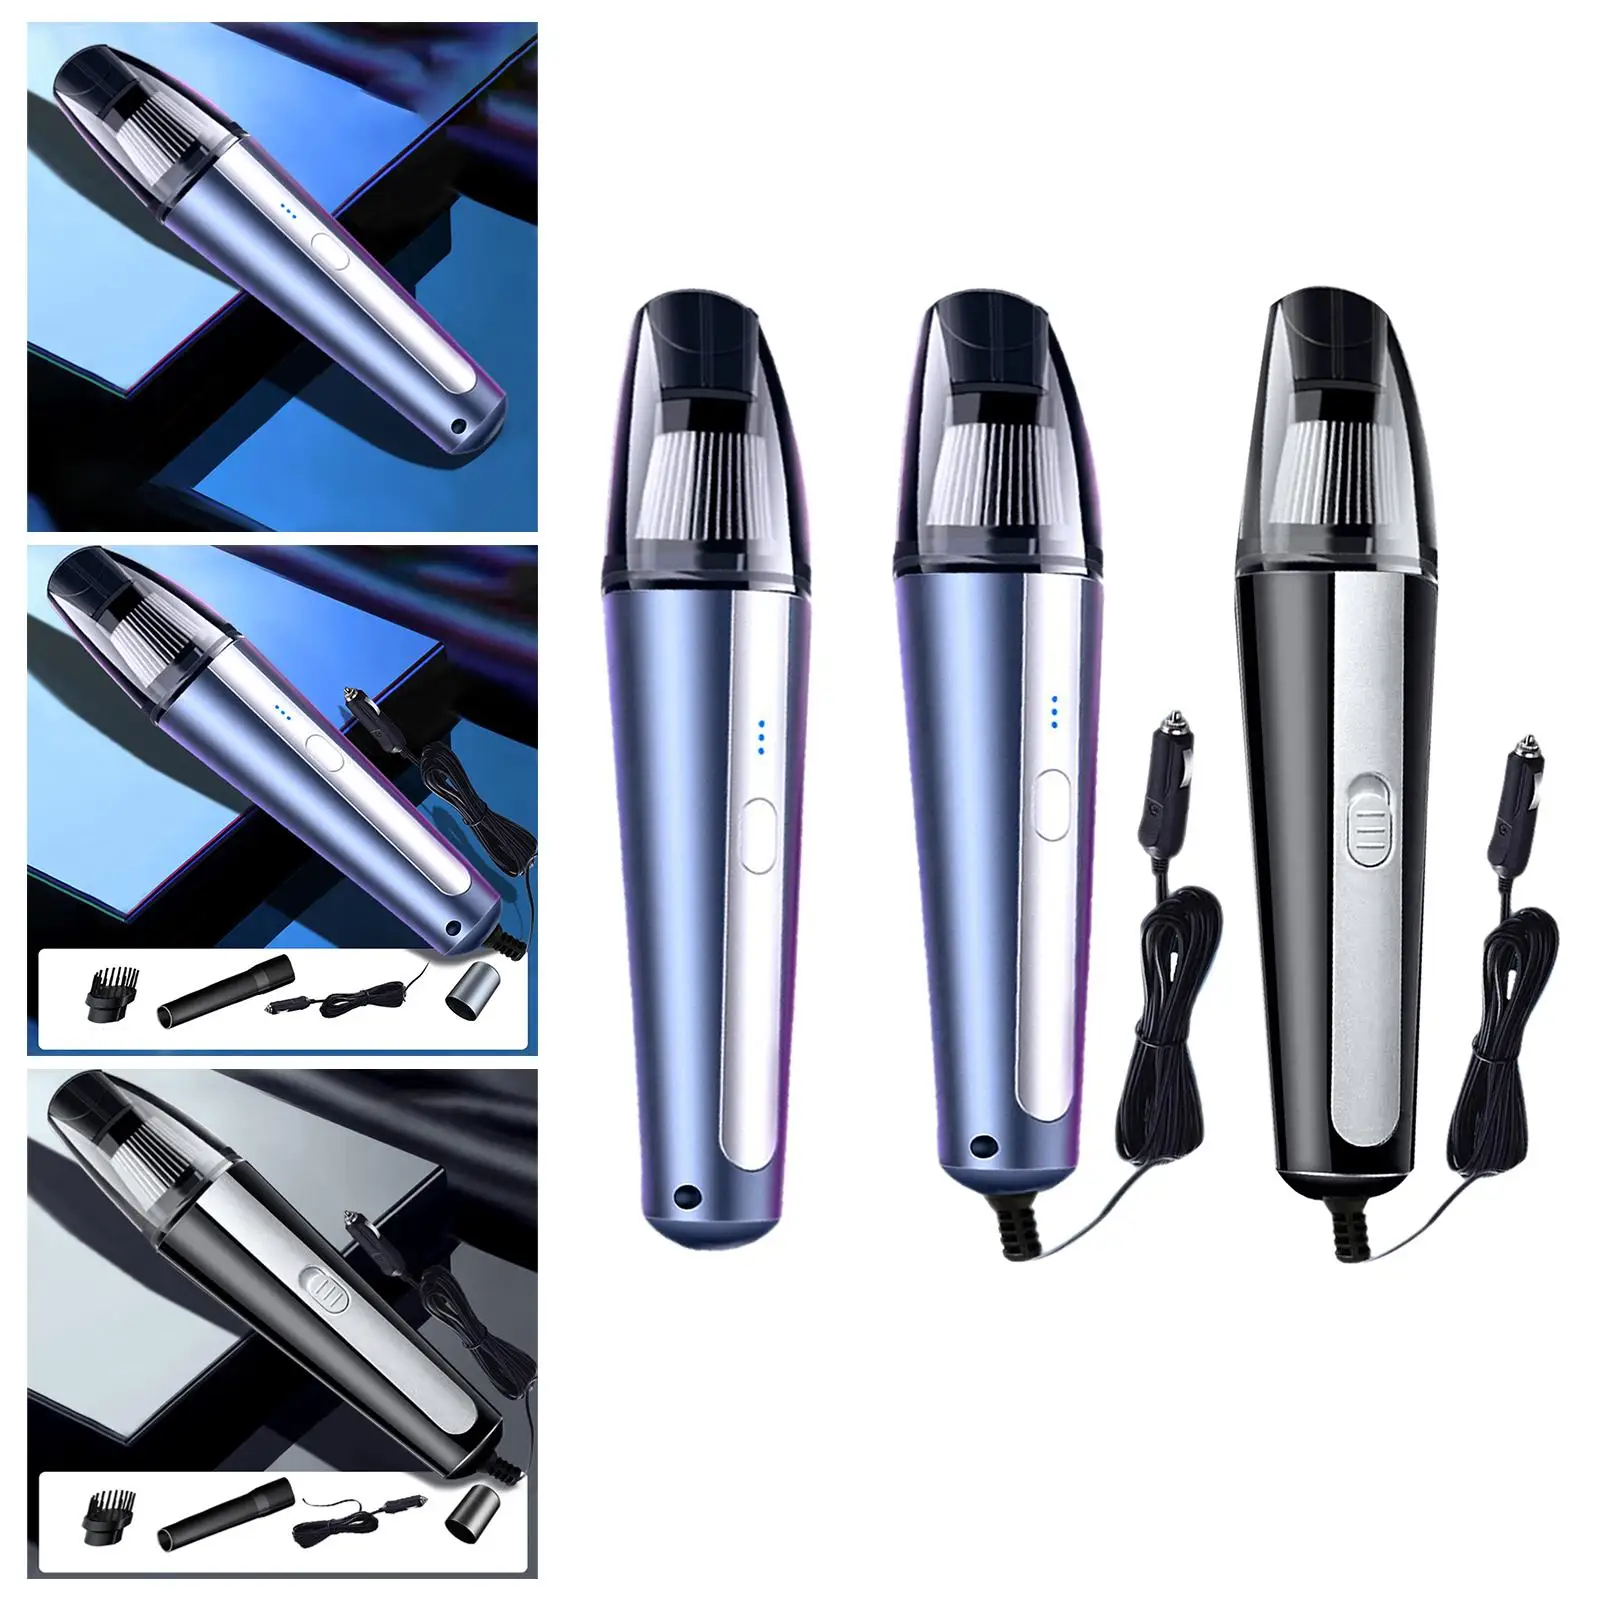 Handheld Car Vacuum Cleaner Dry and Wet Use 6000PA 4000mAh Powerful Removable